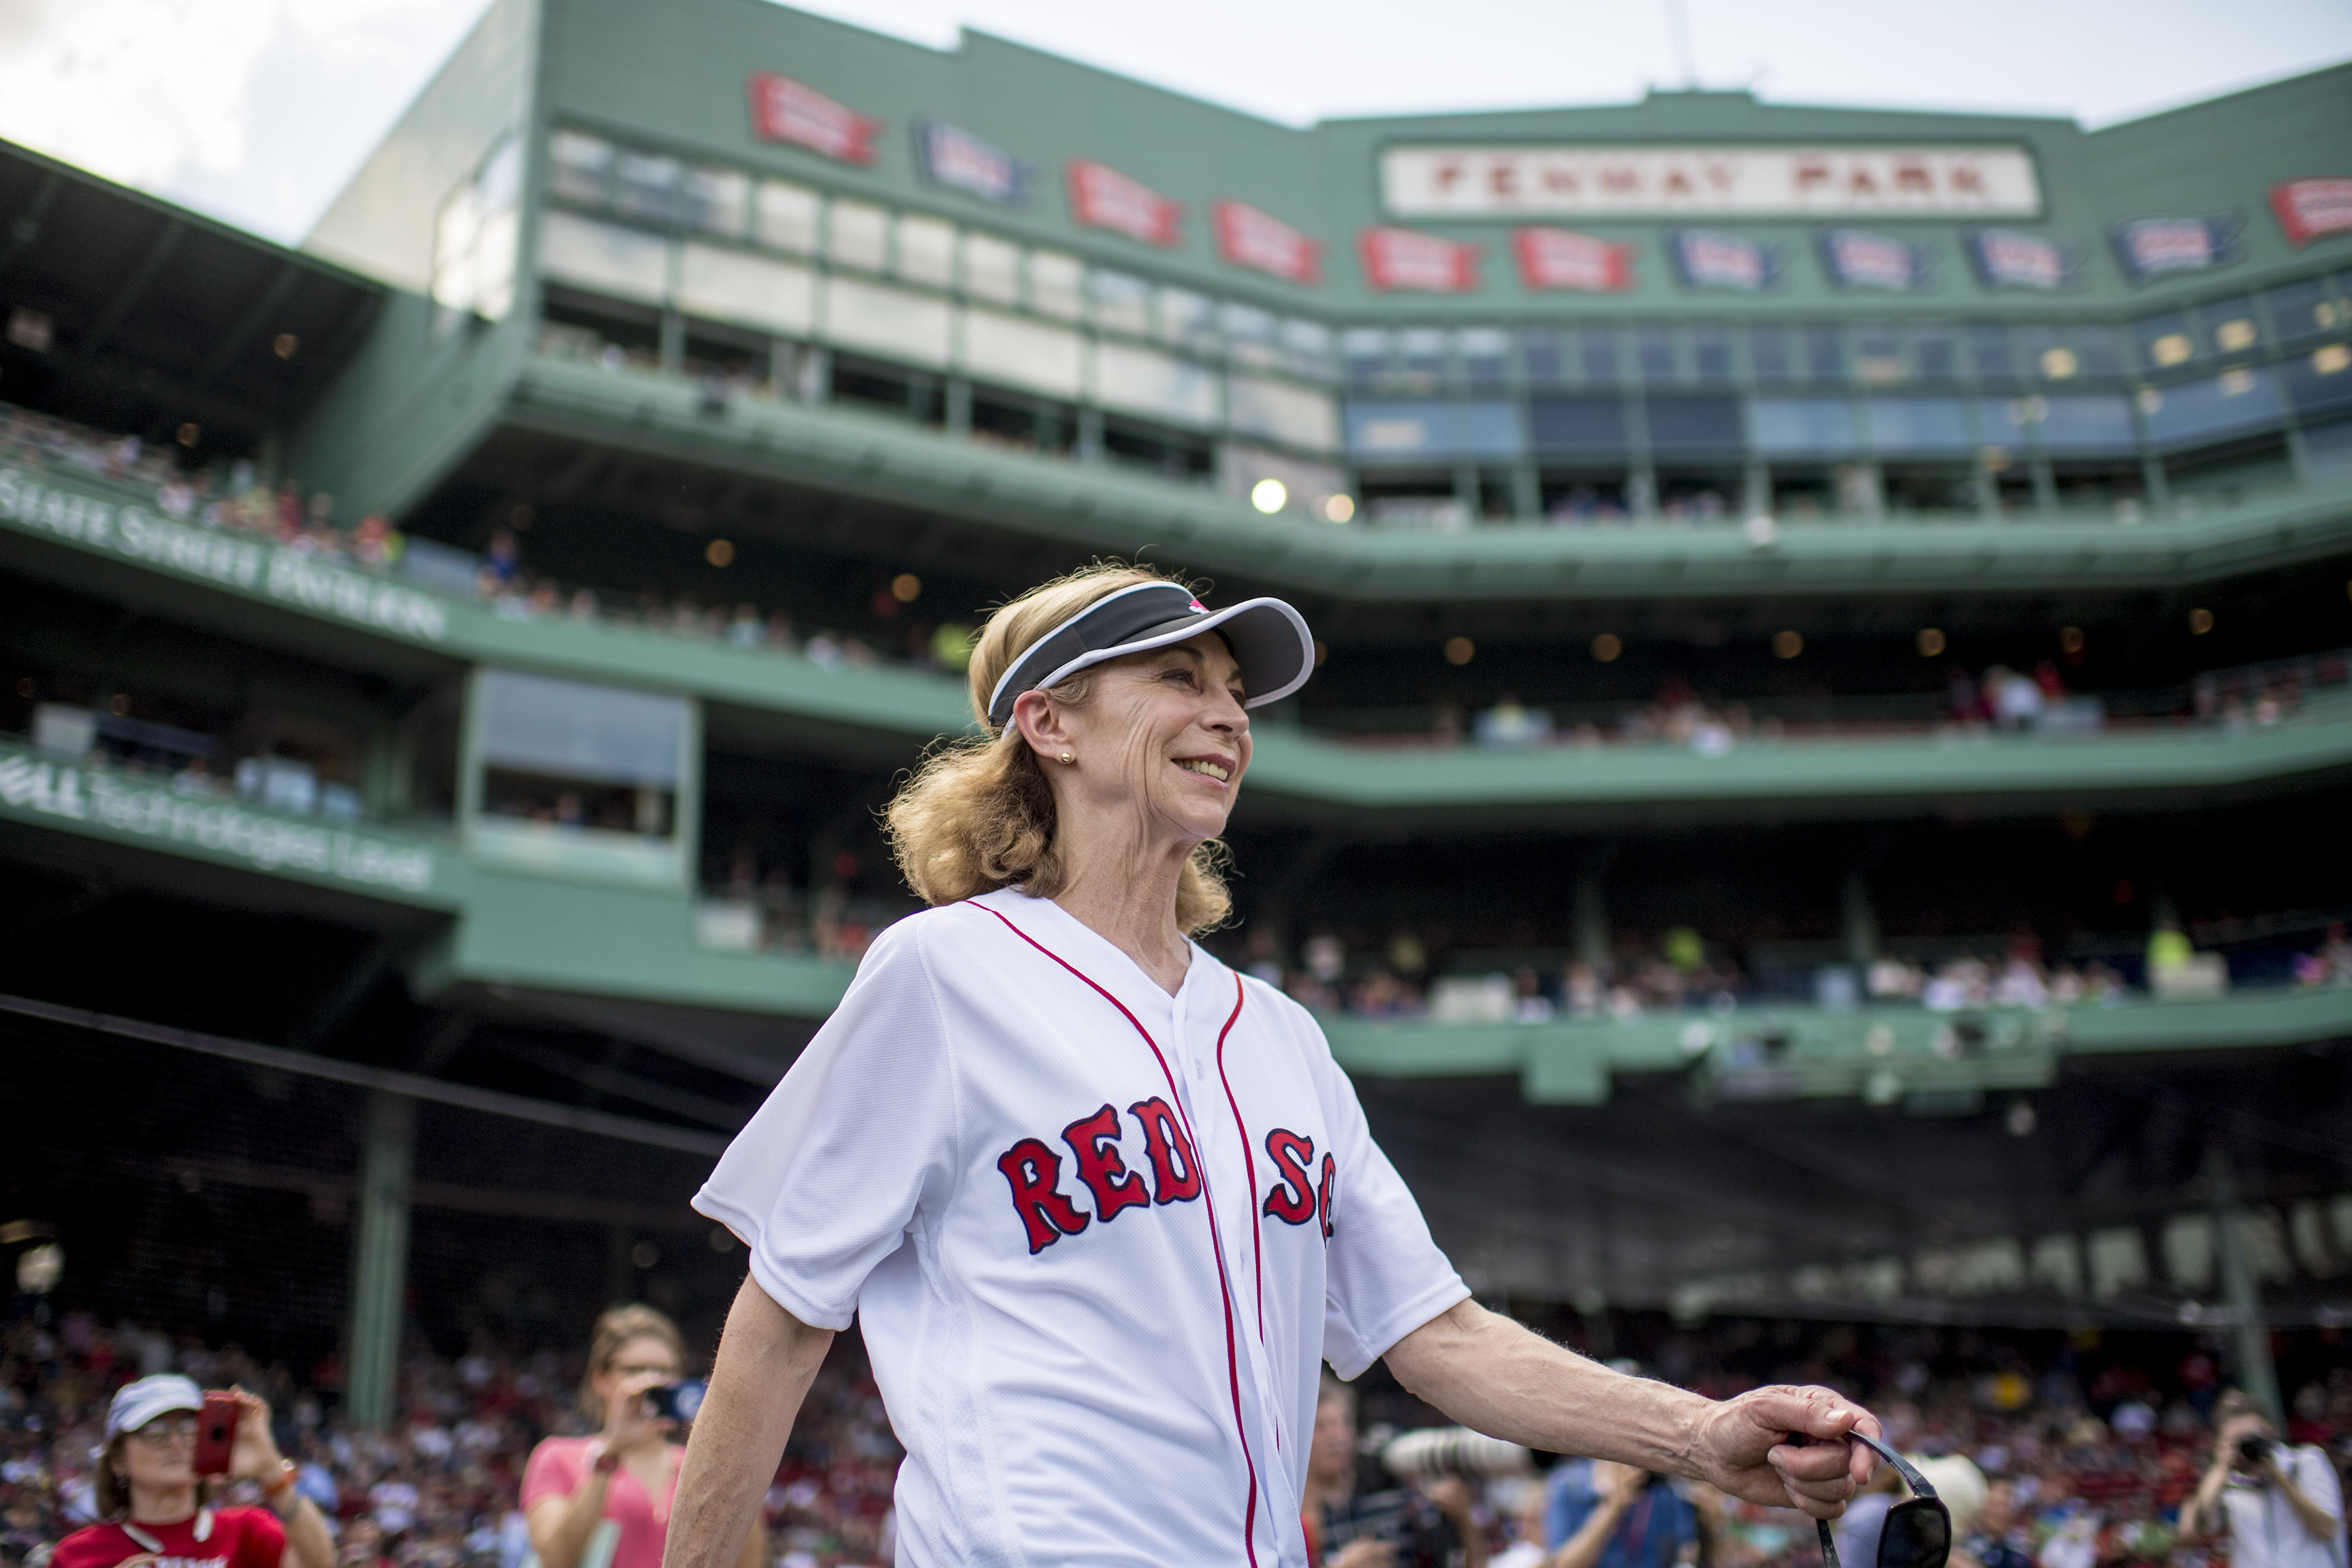 BOSTON, MA - APRIL 16: Katherine Switzer, the first official woman Boston Marathon runner, is introduced before throwing out a ceremonial first pitch before a game between the Boston Red Sox and the Tampa Bay Rays on April 16, 2017 at Fenway Park in Boston, Massachusetts. (Photo by Billie Weiss/Boston Red Sox/Getty Images) *** Local Caption *** Katherine Switzer